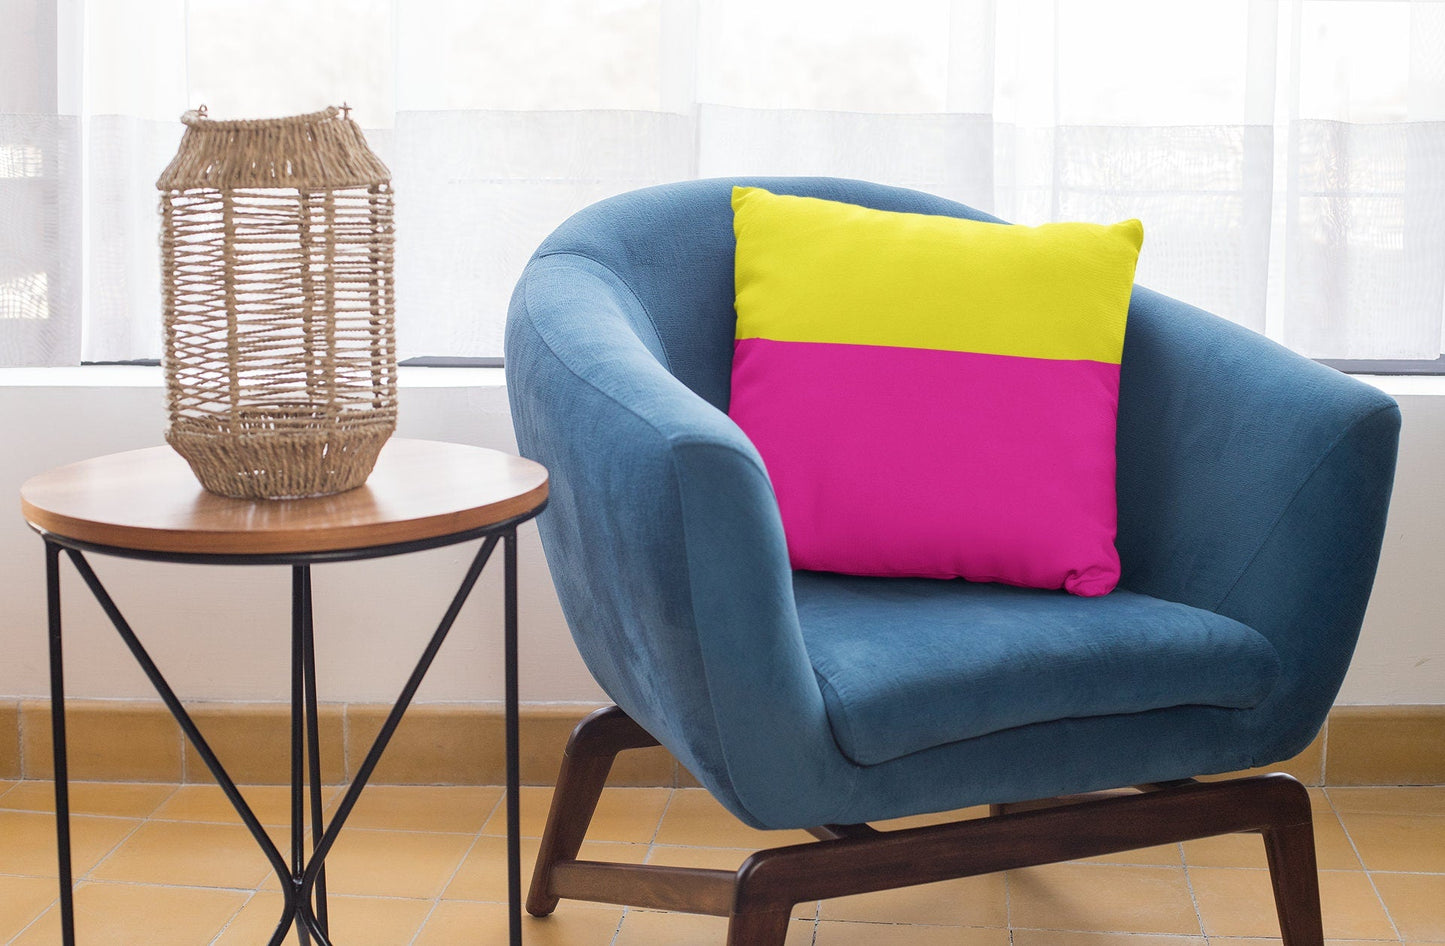 Bright Pink Pillow Cover with Yellow Color Block